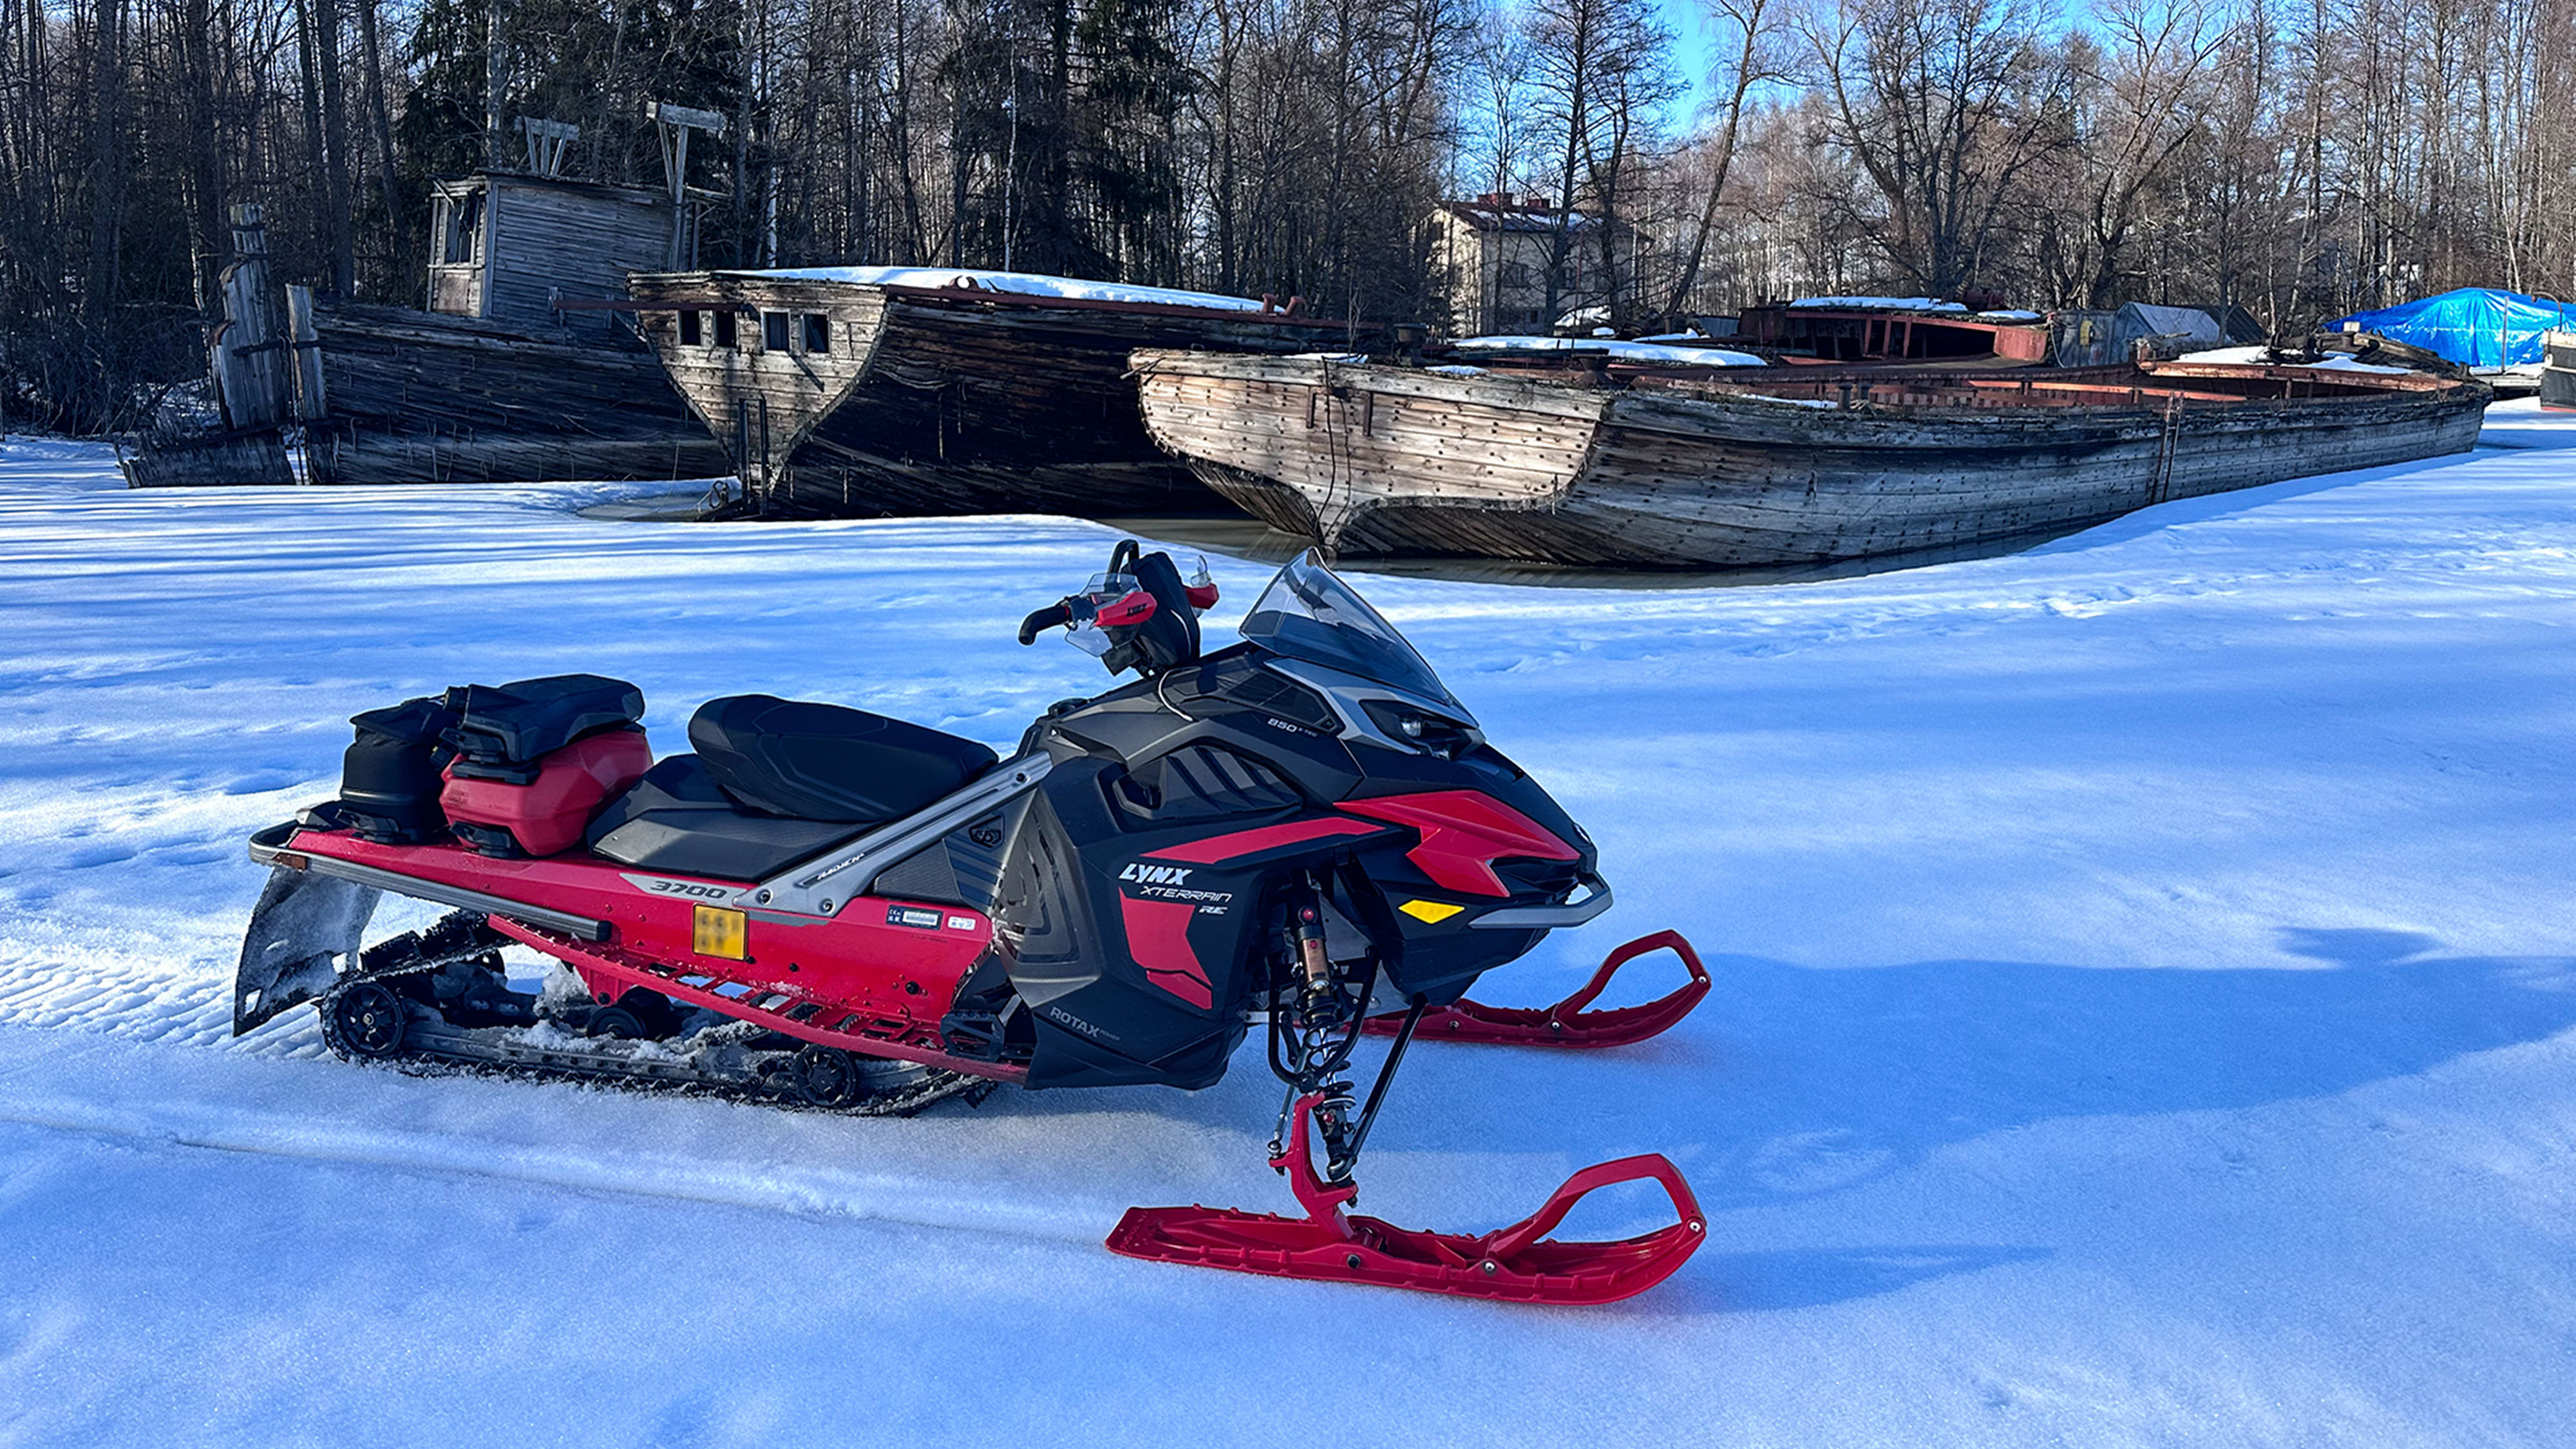 Lynx Xterrain RE 850 E-TEC crossover snowmobile parked next to old lake boats